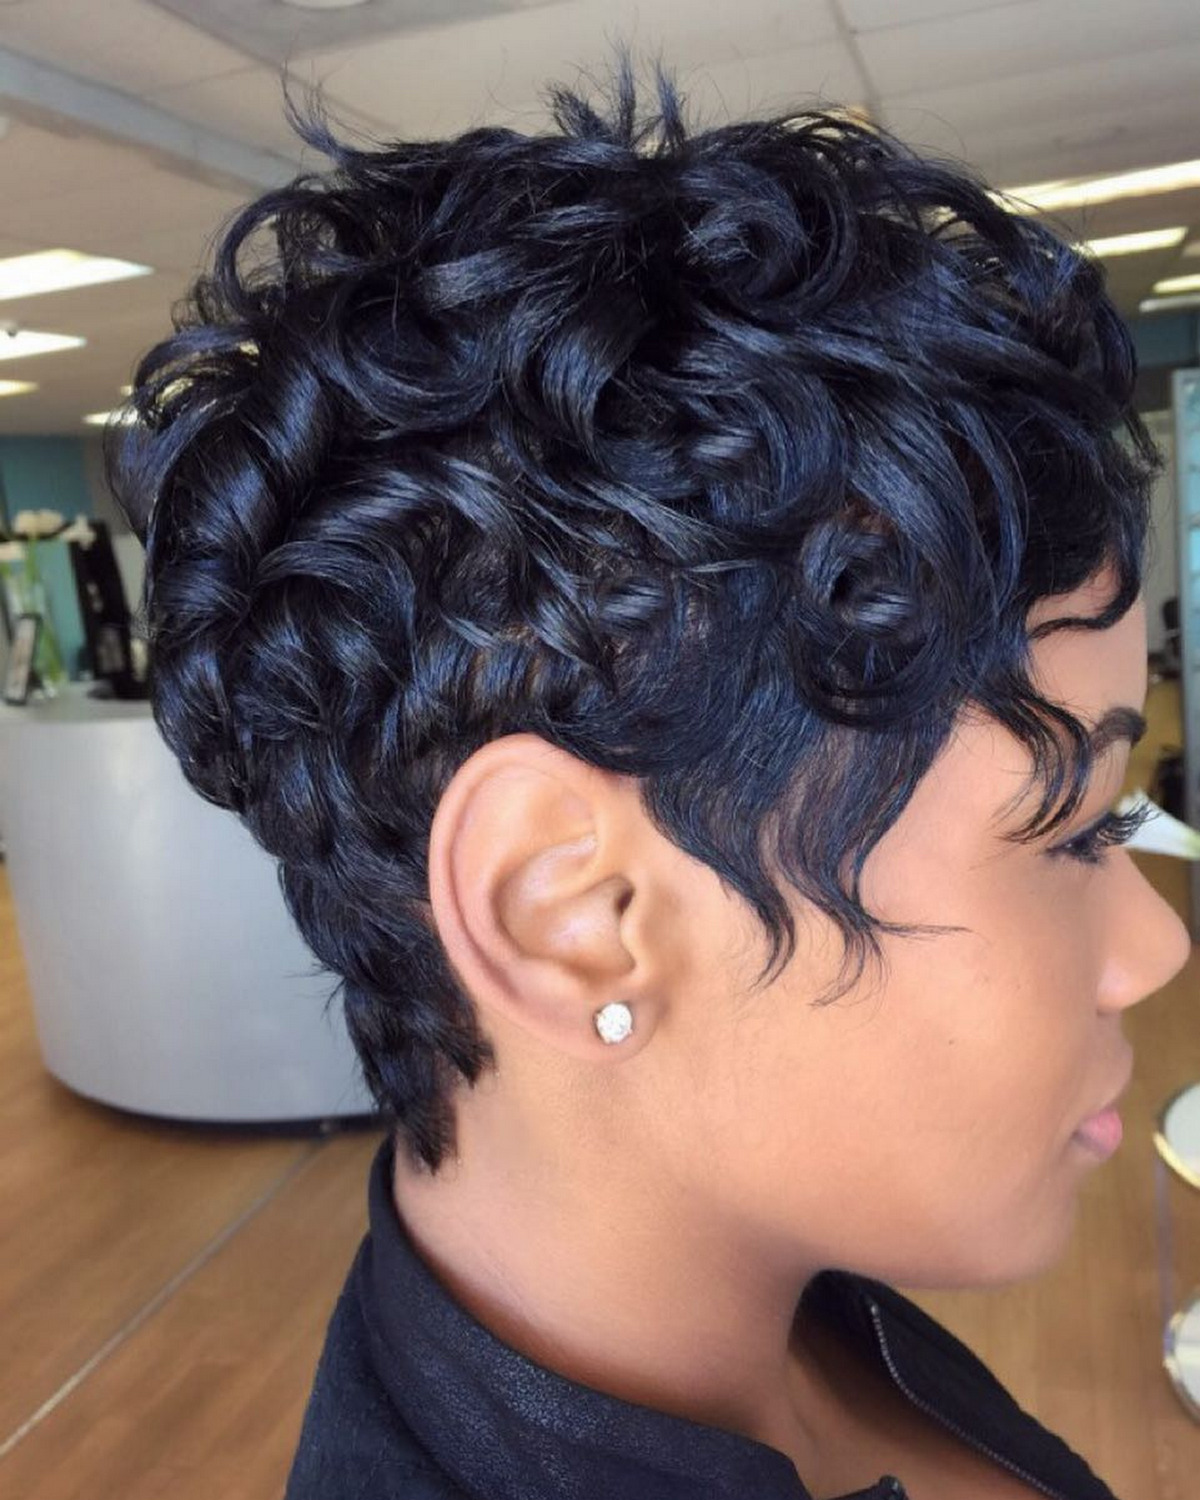 Curly Layer Short Hair